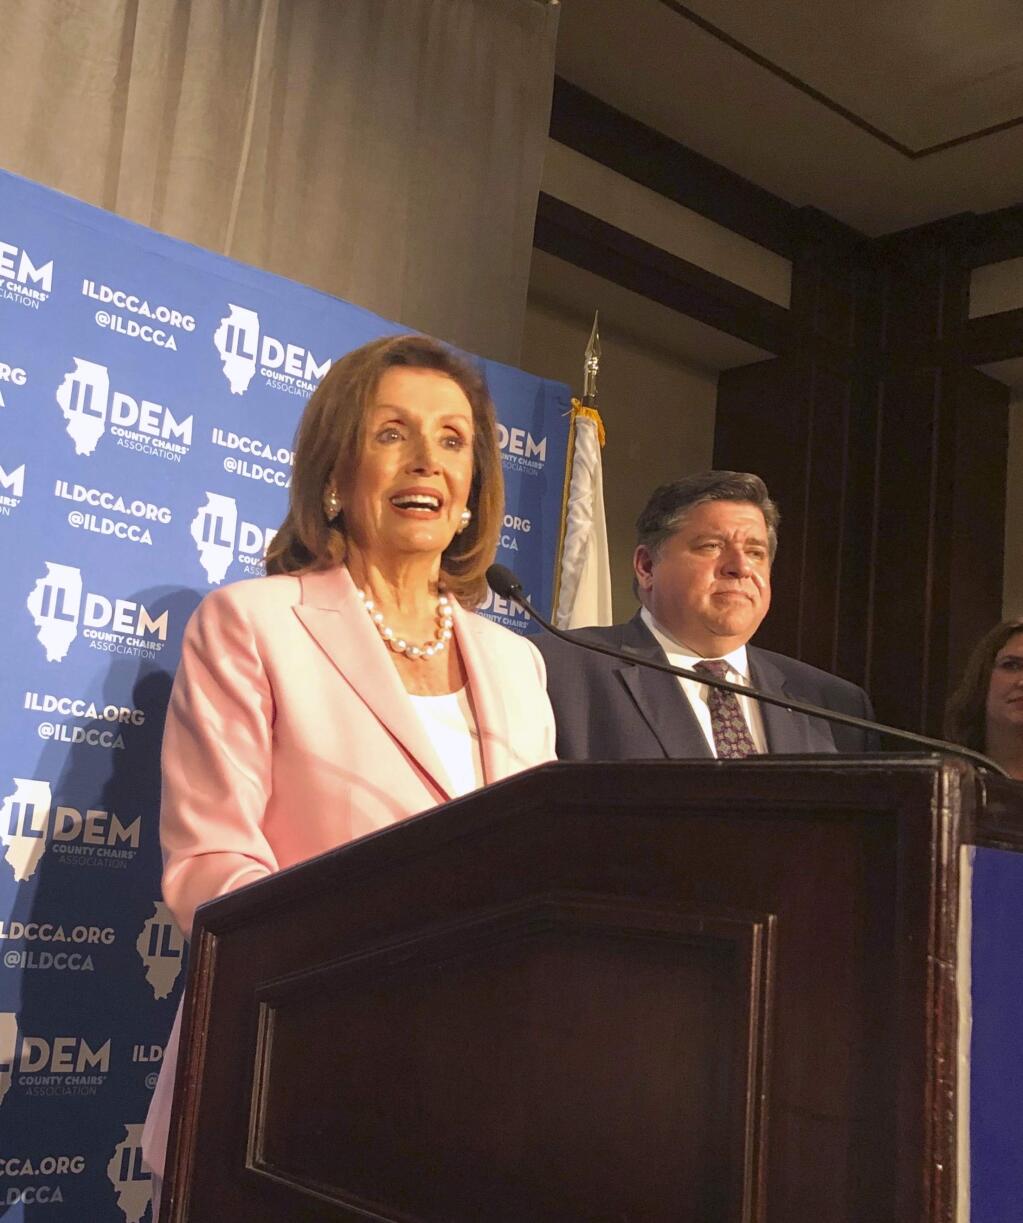 U.S. House Speaker Nancy Pelosi answers reporters' questions after keynoting the Illinois Democratic County Chairs' Association brunch Wednesday, August 14, 2019 at the Illinois State Fair in Springfield. The California Democrat exhorted about 2,200 Democrats at the event to defeat Republican President Donald Trump and give Democrats a U.S. Senate majority in 2020. (AP Photo/John O'Connor)